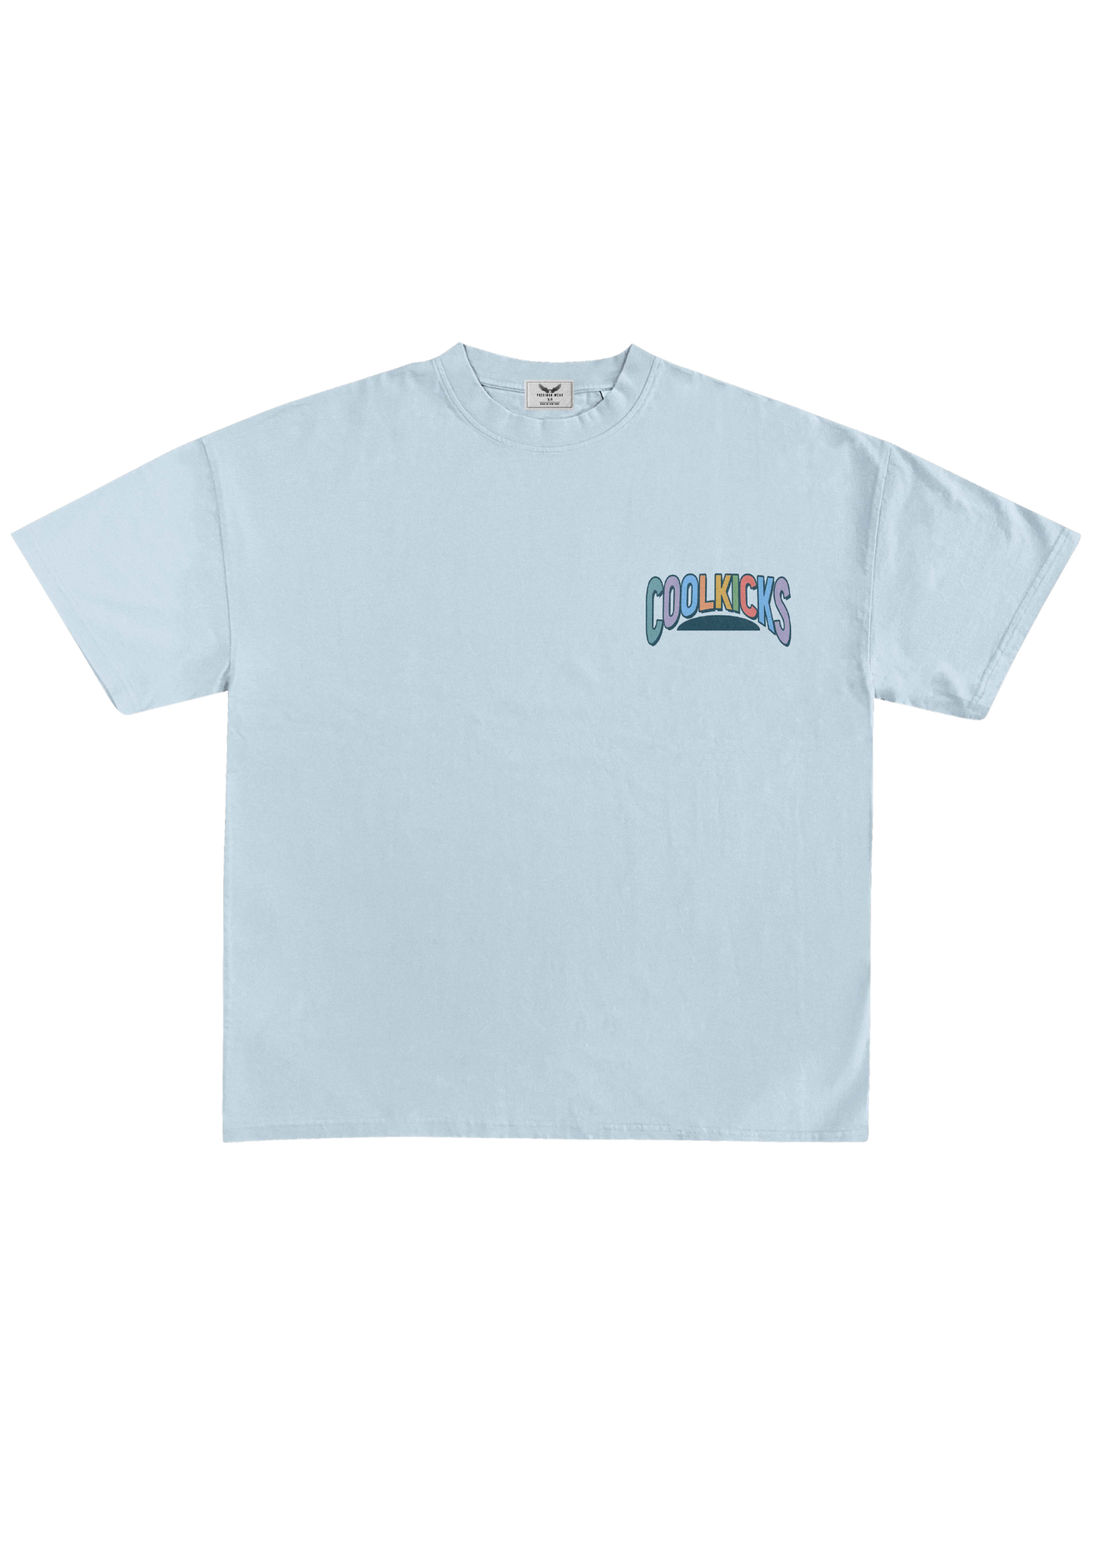 COOLKICKS Shoe Supply Multi-Color Tee